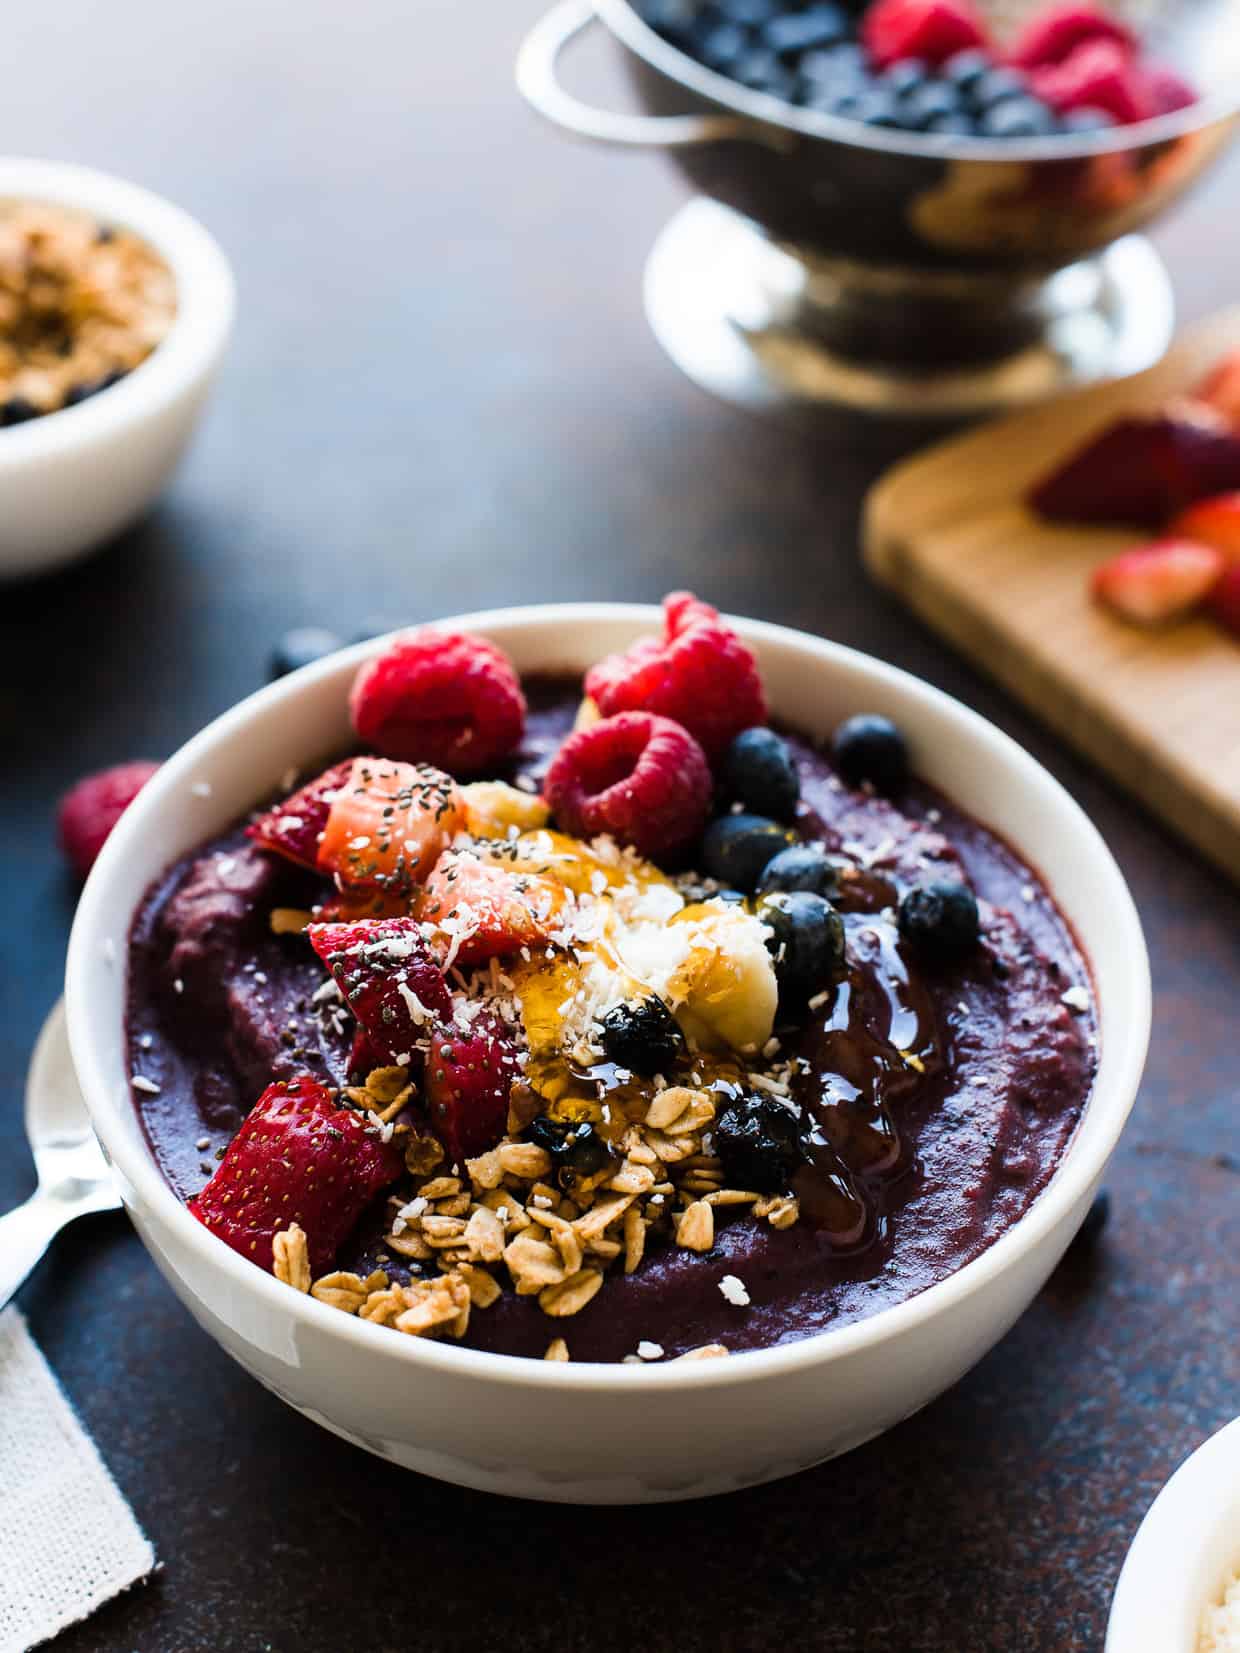 Acai Berry Bowl topped with berries, granola, coconut and honey.